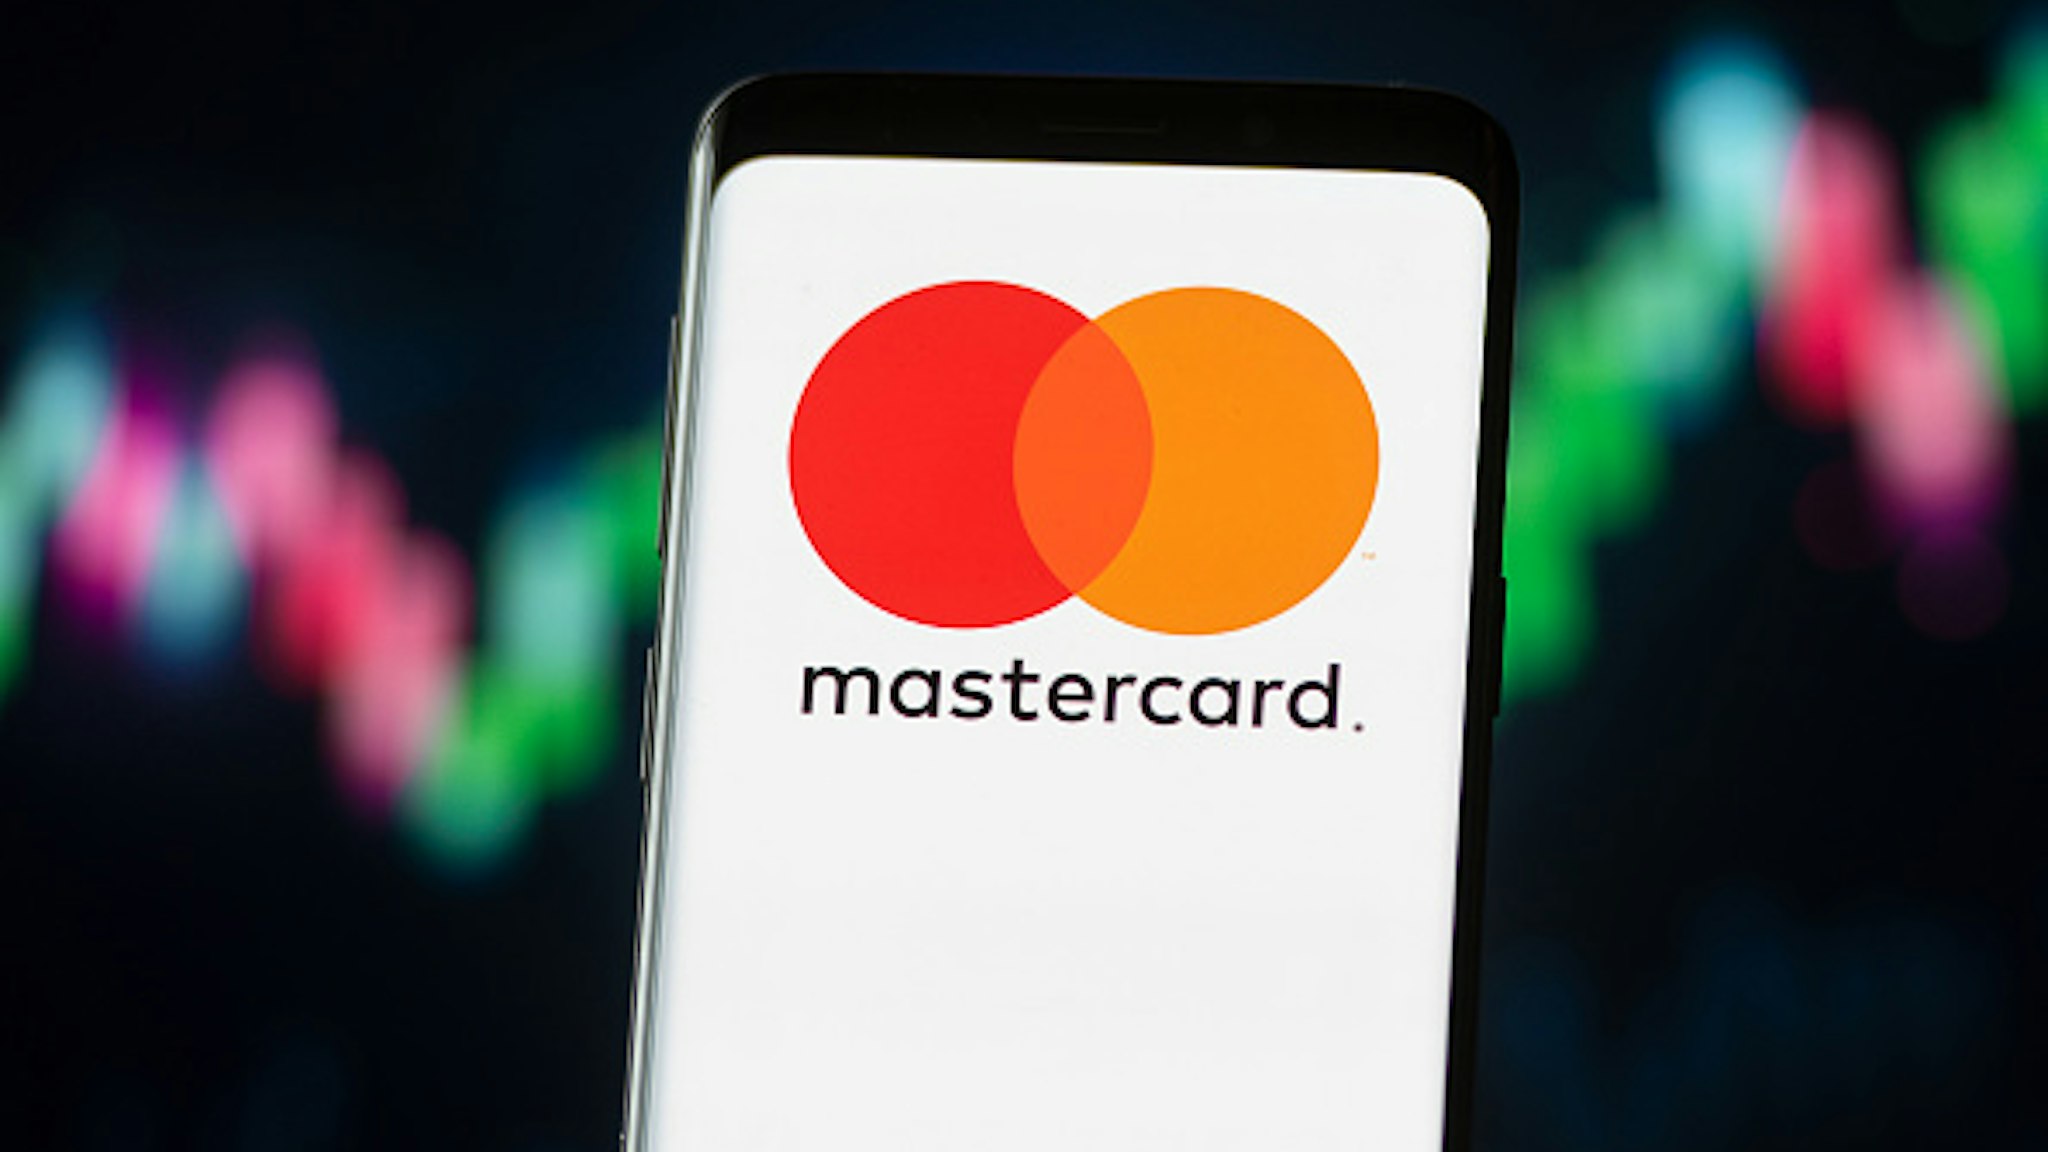 POLAND - 2020/11/04: In this photo illustration a Mastercard logo seen displayed on a smartphone.